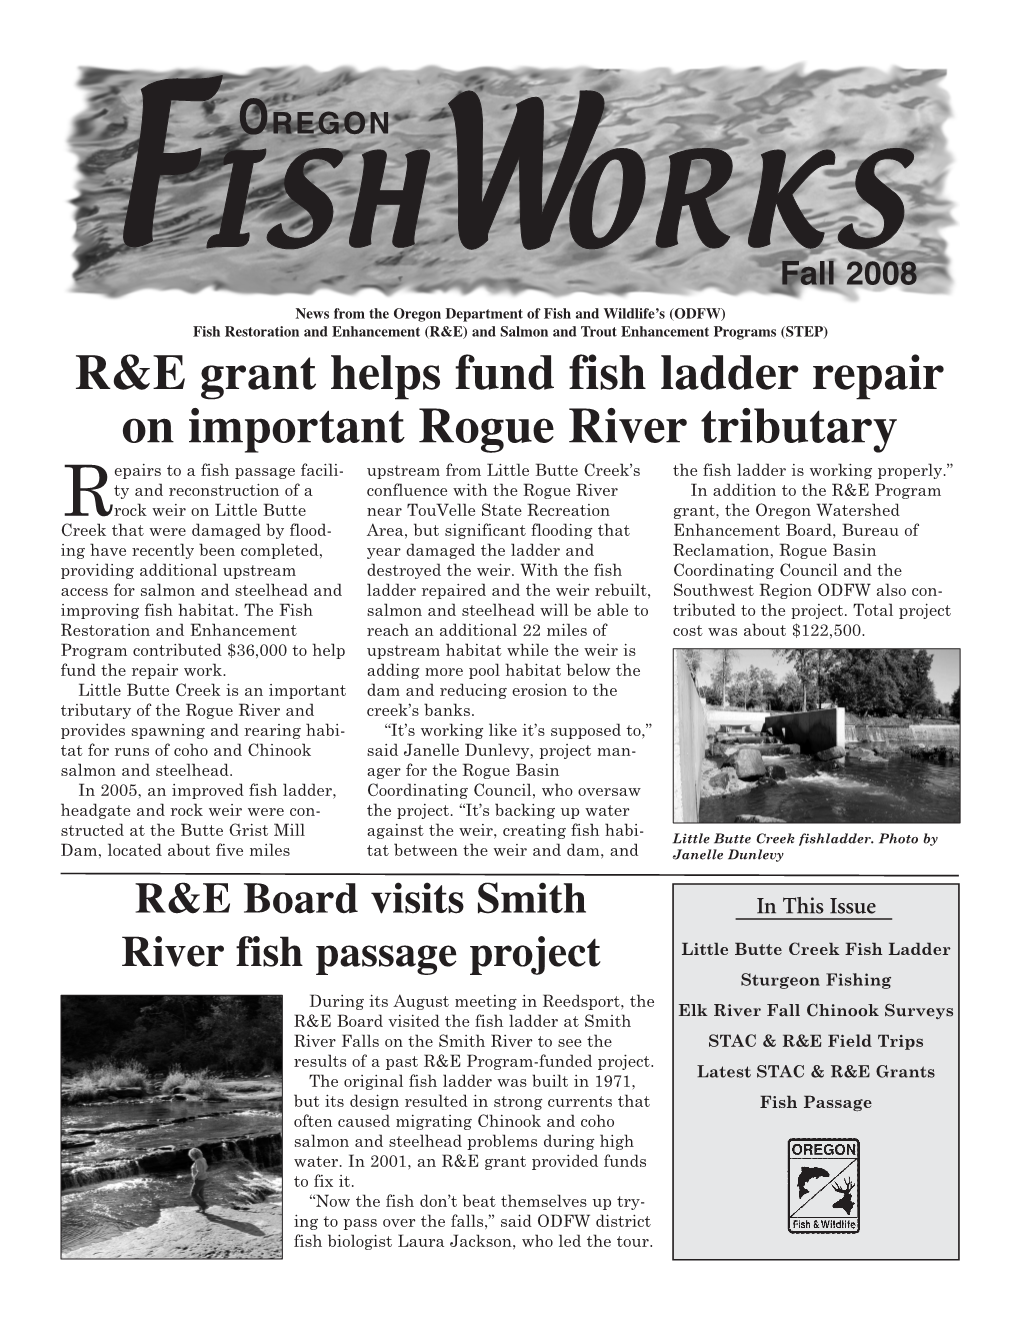 R&E Grant Helps Fund Fish Ladder Repair on Important Rogue River